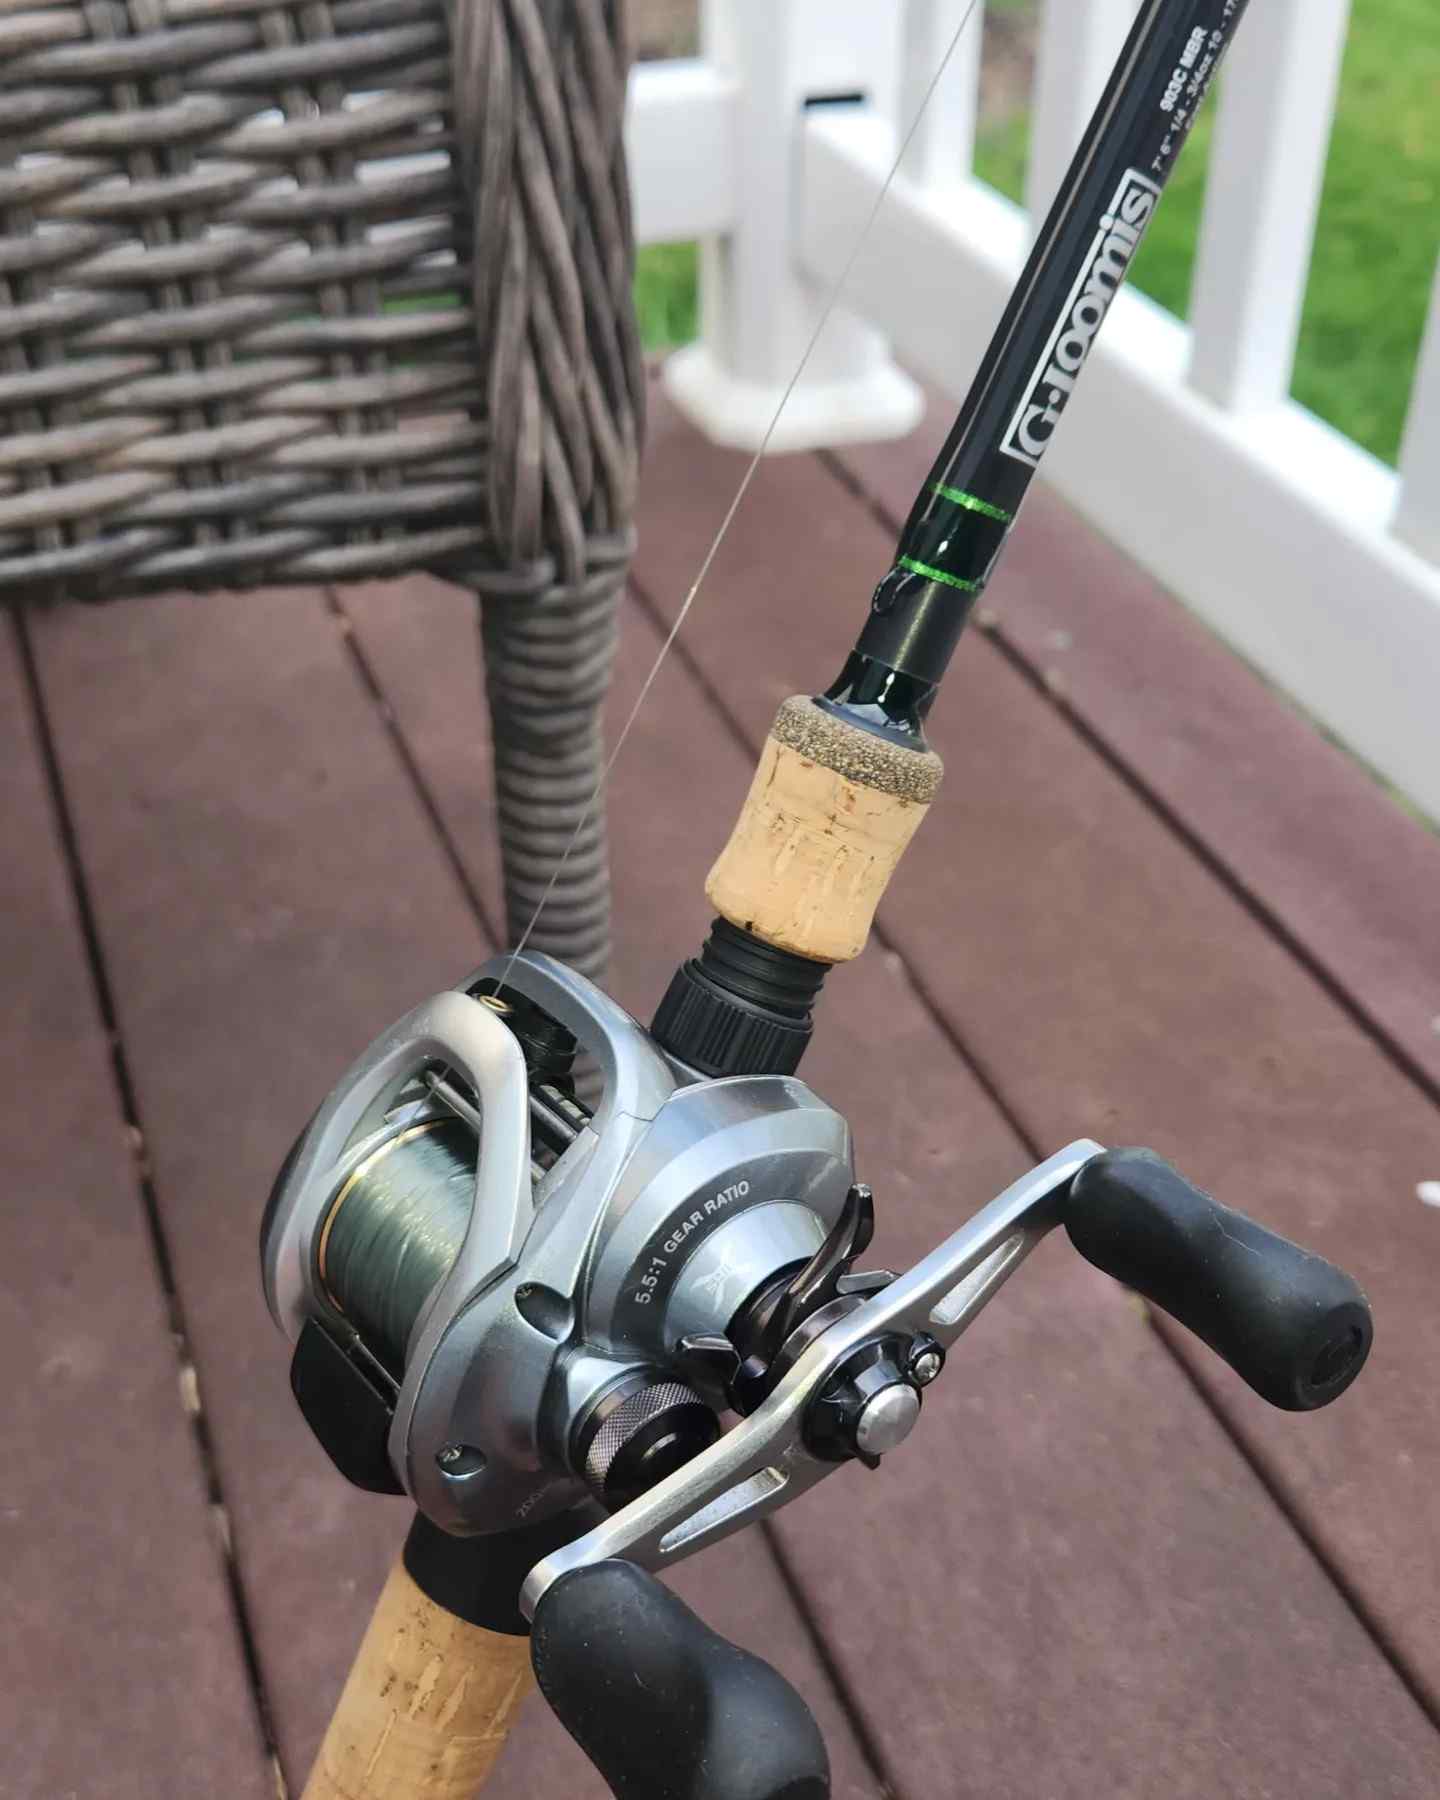 Issues with Daiwa Fuego - Fishing Rods, Reels, Line, and Knots